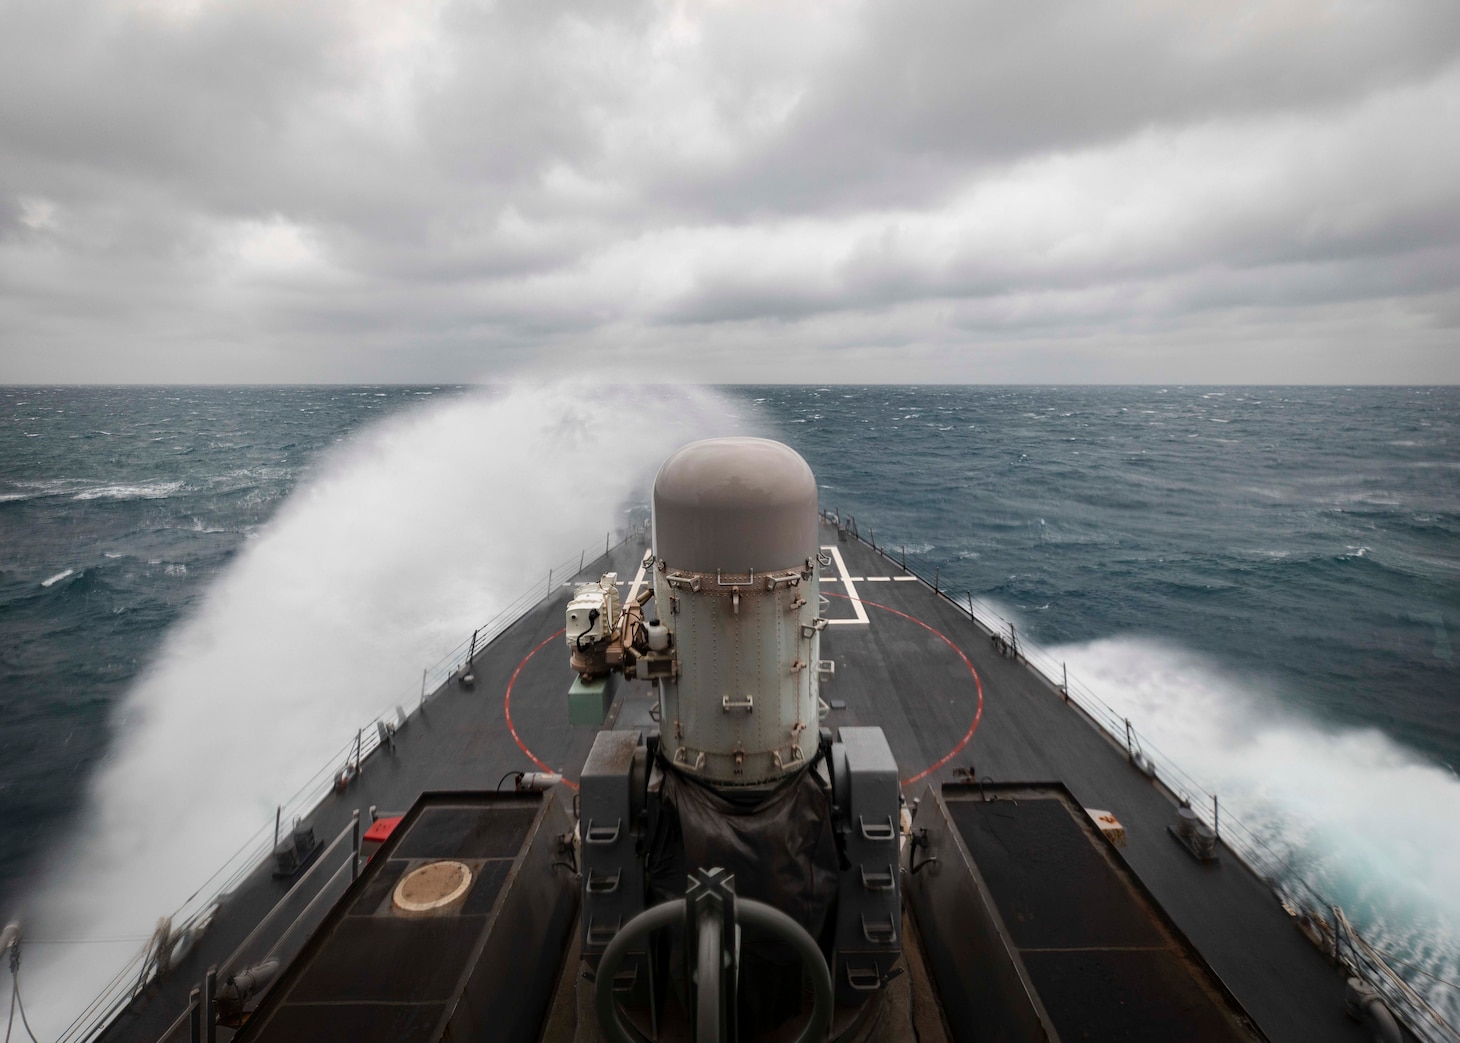 TAIWAN STRAIT (Dec. 30, 2020) Guided-missile destroyer USS John S. McCain (DDG 56) conducts routine underway operations in support of stability and security for a free and open Indo-Pacific. Sea control is foundational for all other naval missions that support the Joint Force, including power projection.